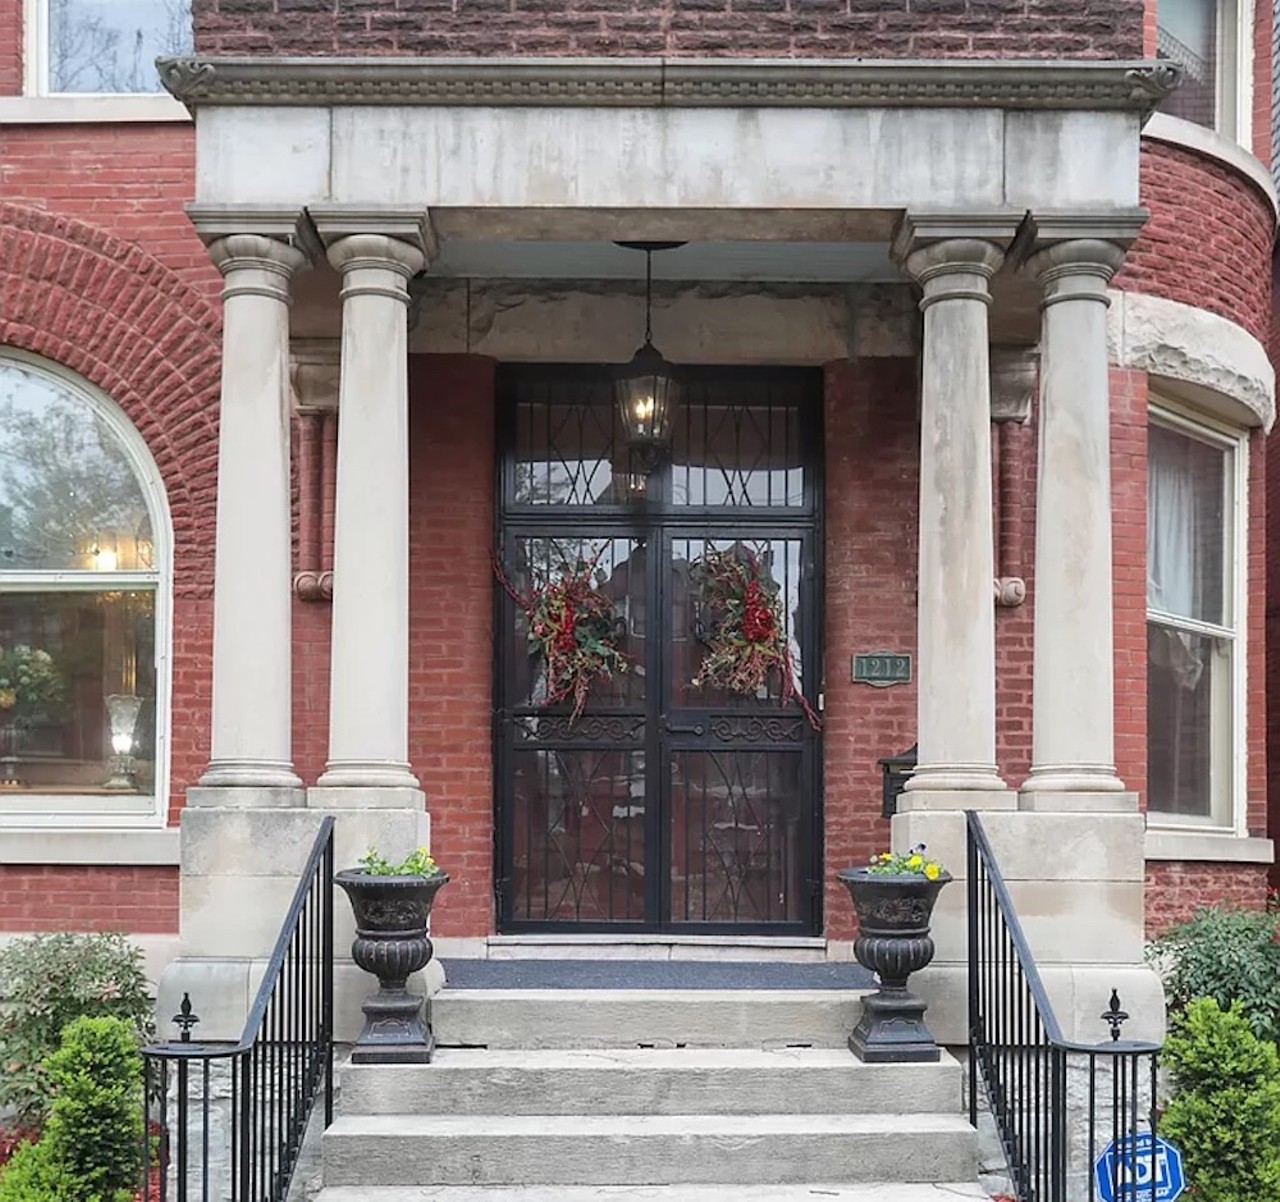 This Historic Old Louisville Home For Sale Has A Secret Backyard Oasis [PHOTOS]